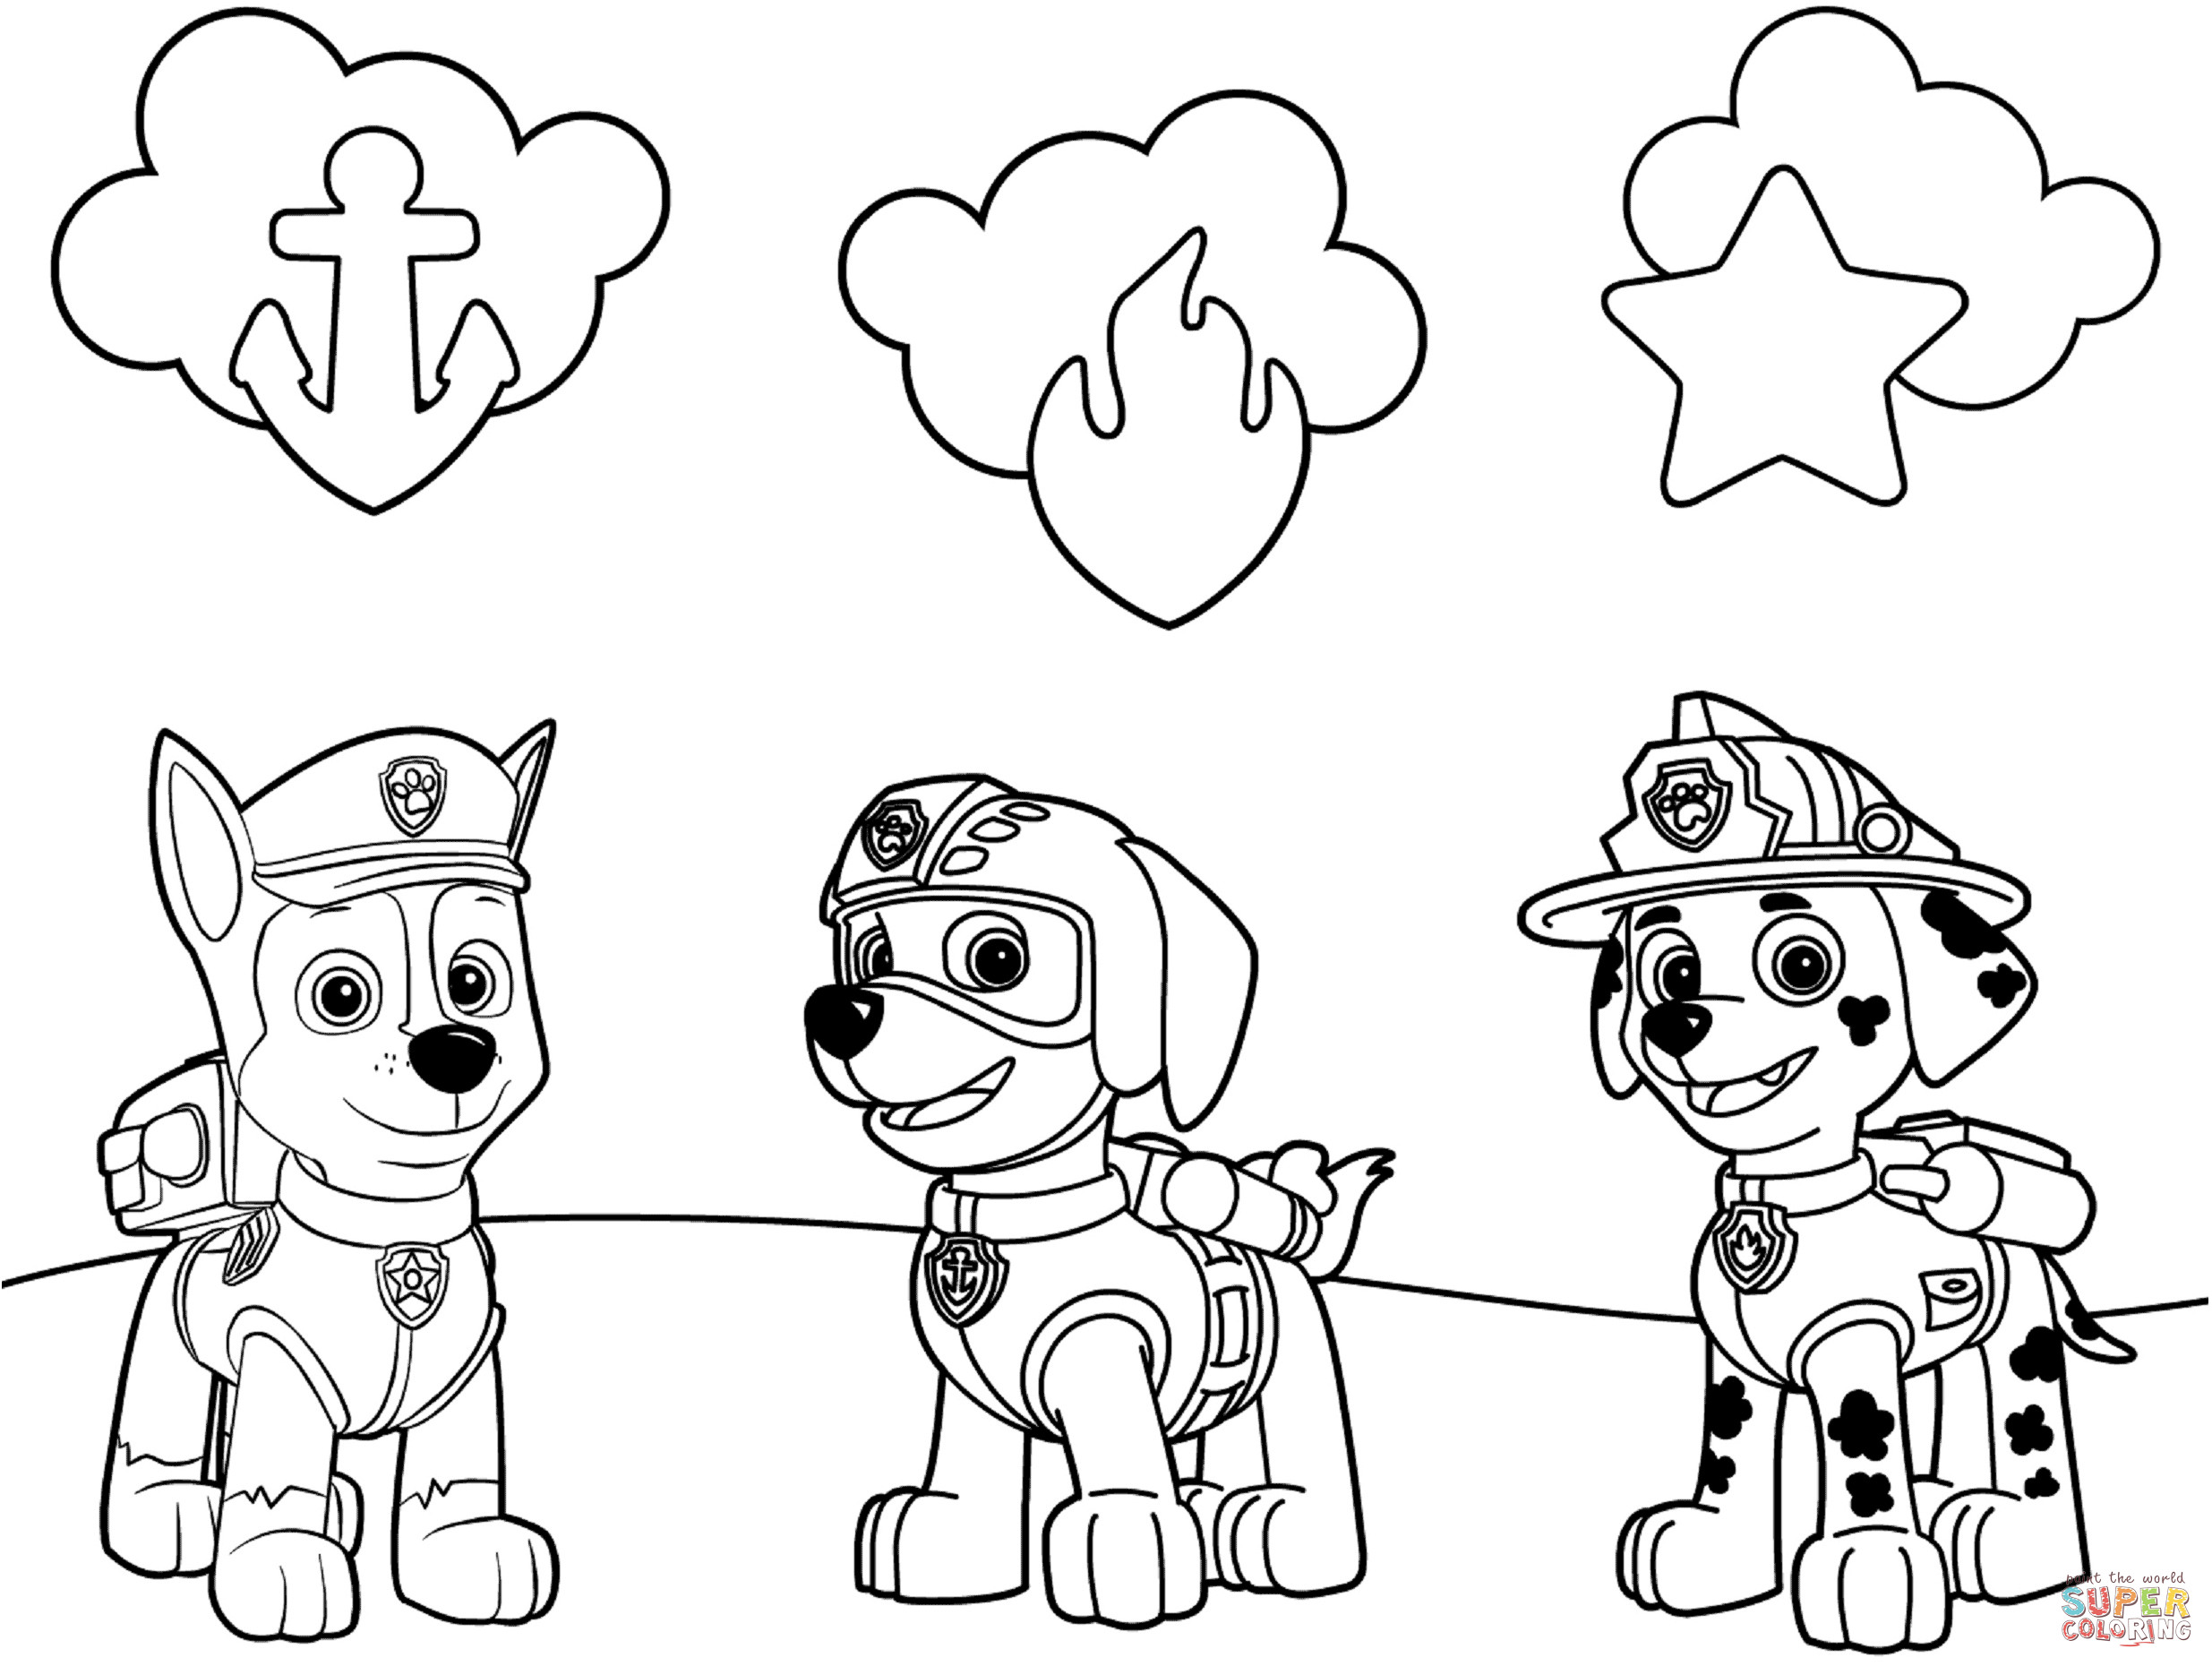 Free Paw Patrol Coloring Pages
 Paw Patrol Badges coloring page